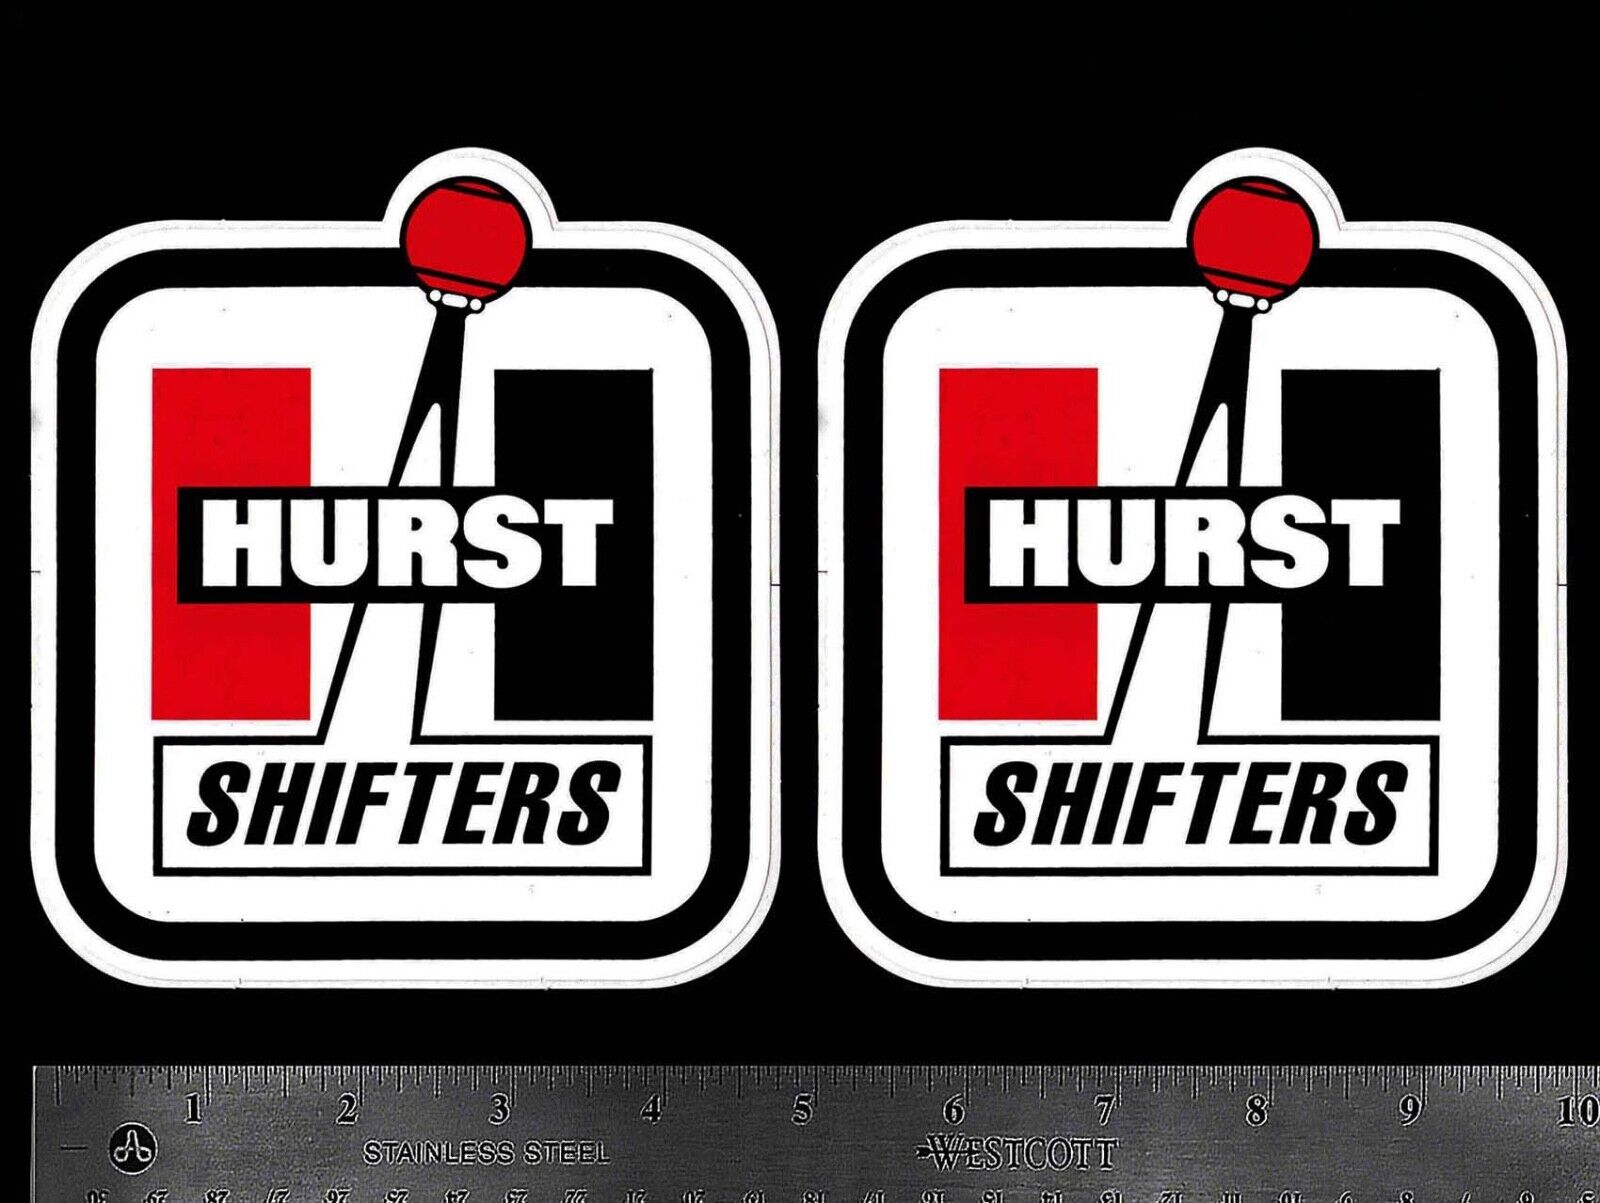 HURST Shifters - Set of 2 Original Vintage 1970’s 80’s Racing Decals/Stickers LG